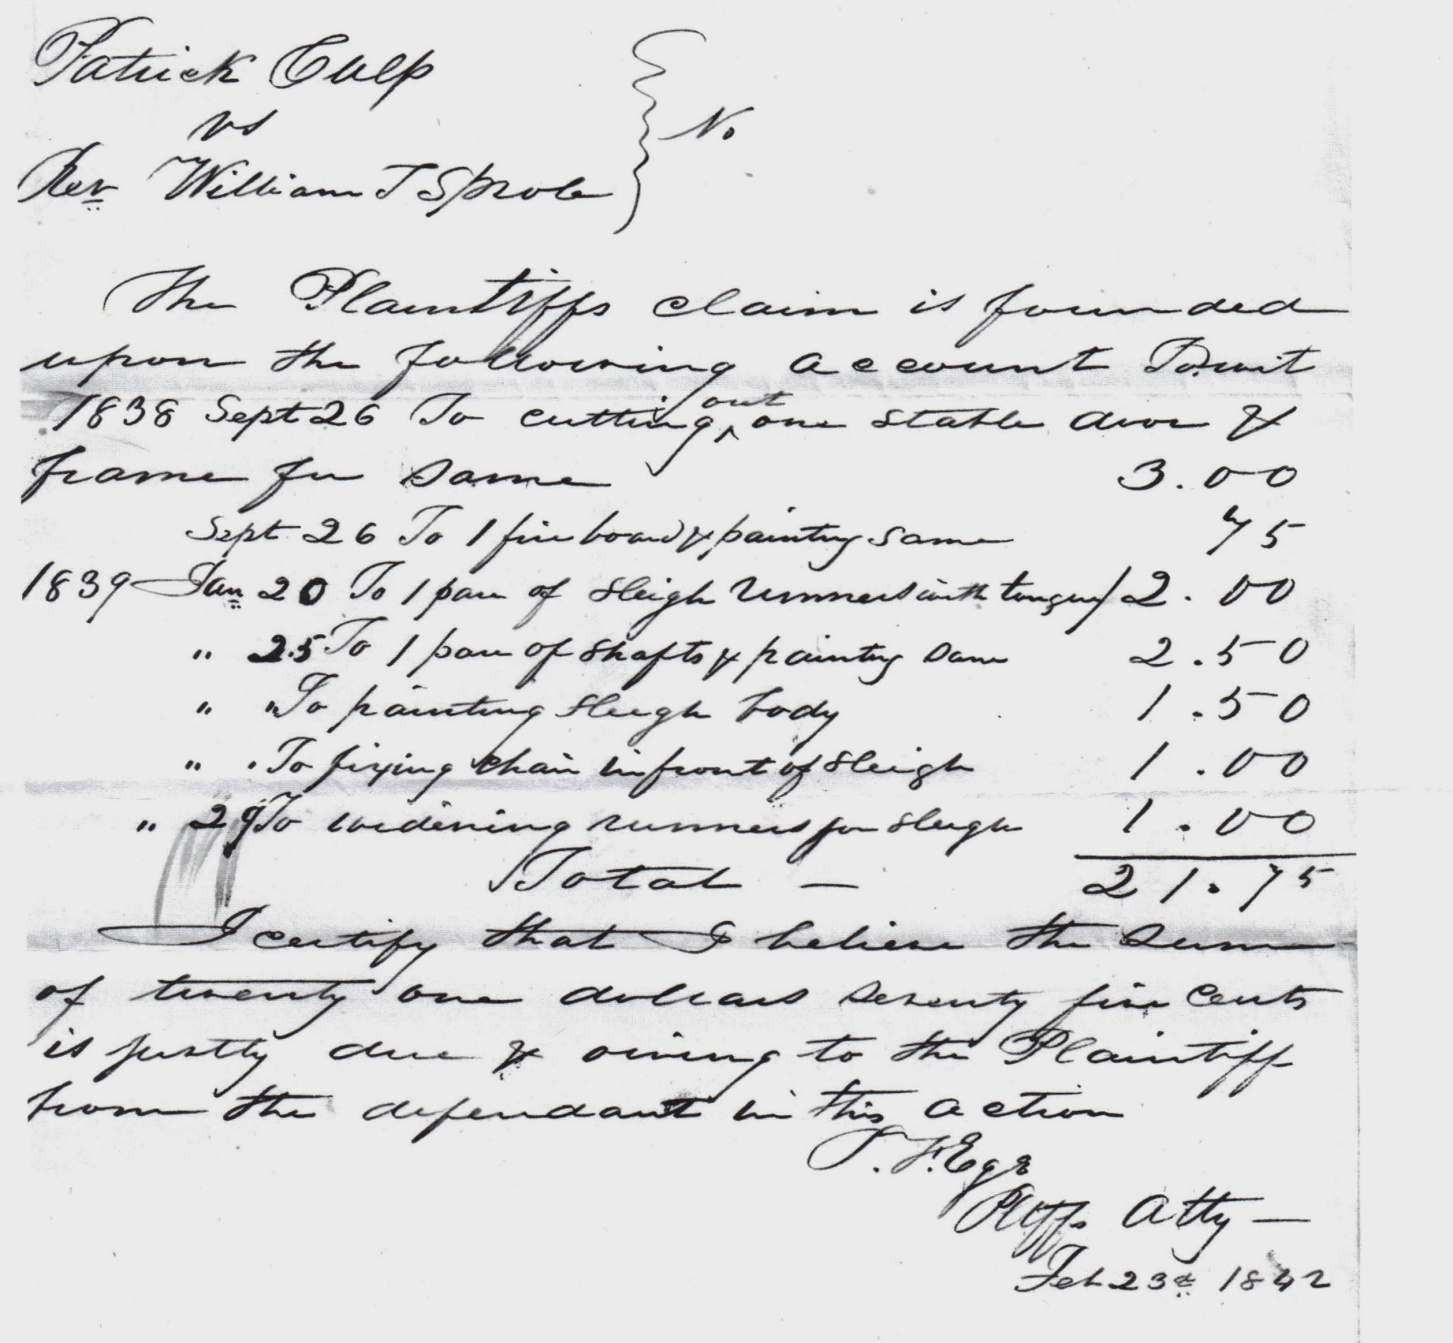 Scan of Culp’s account of the work done for Reverend Sprole.